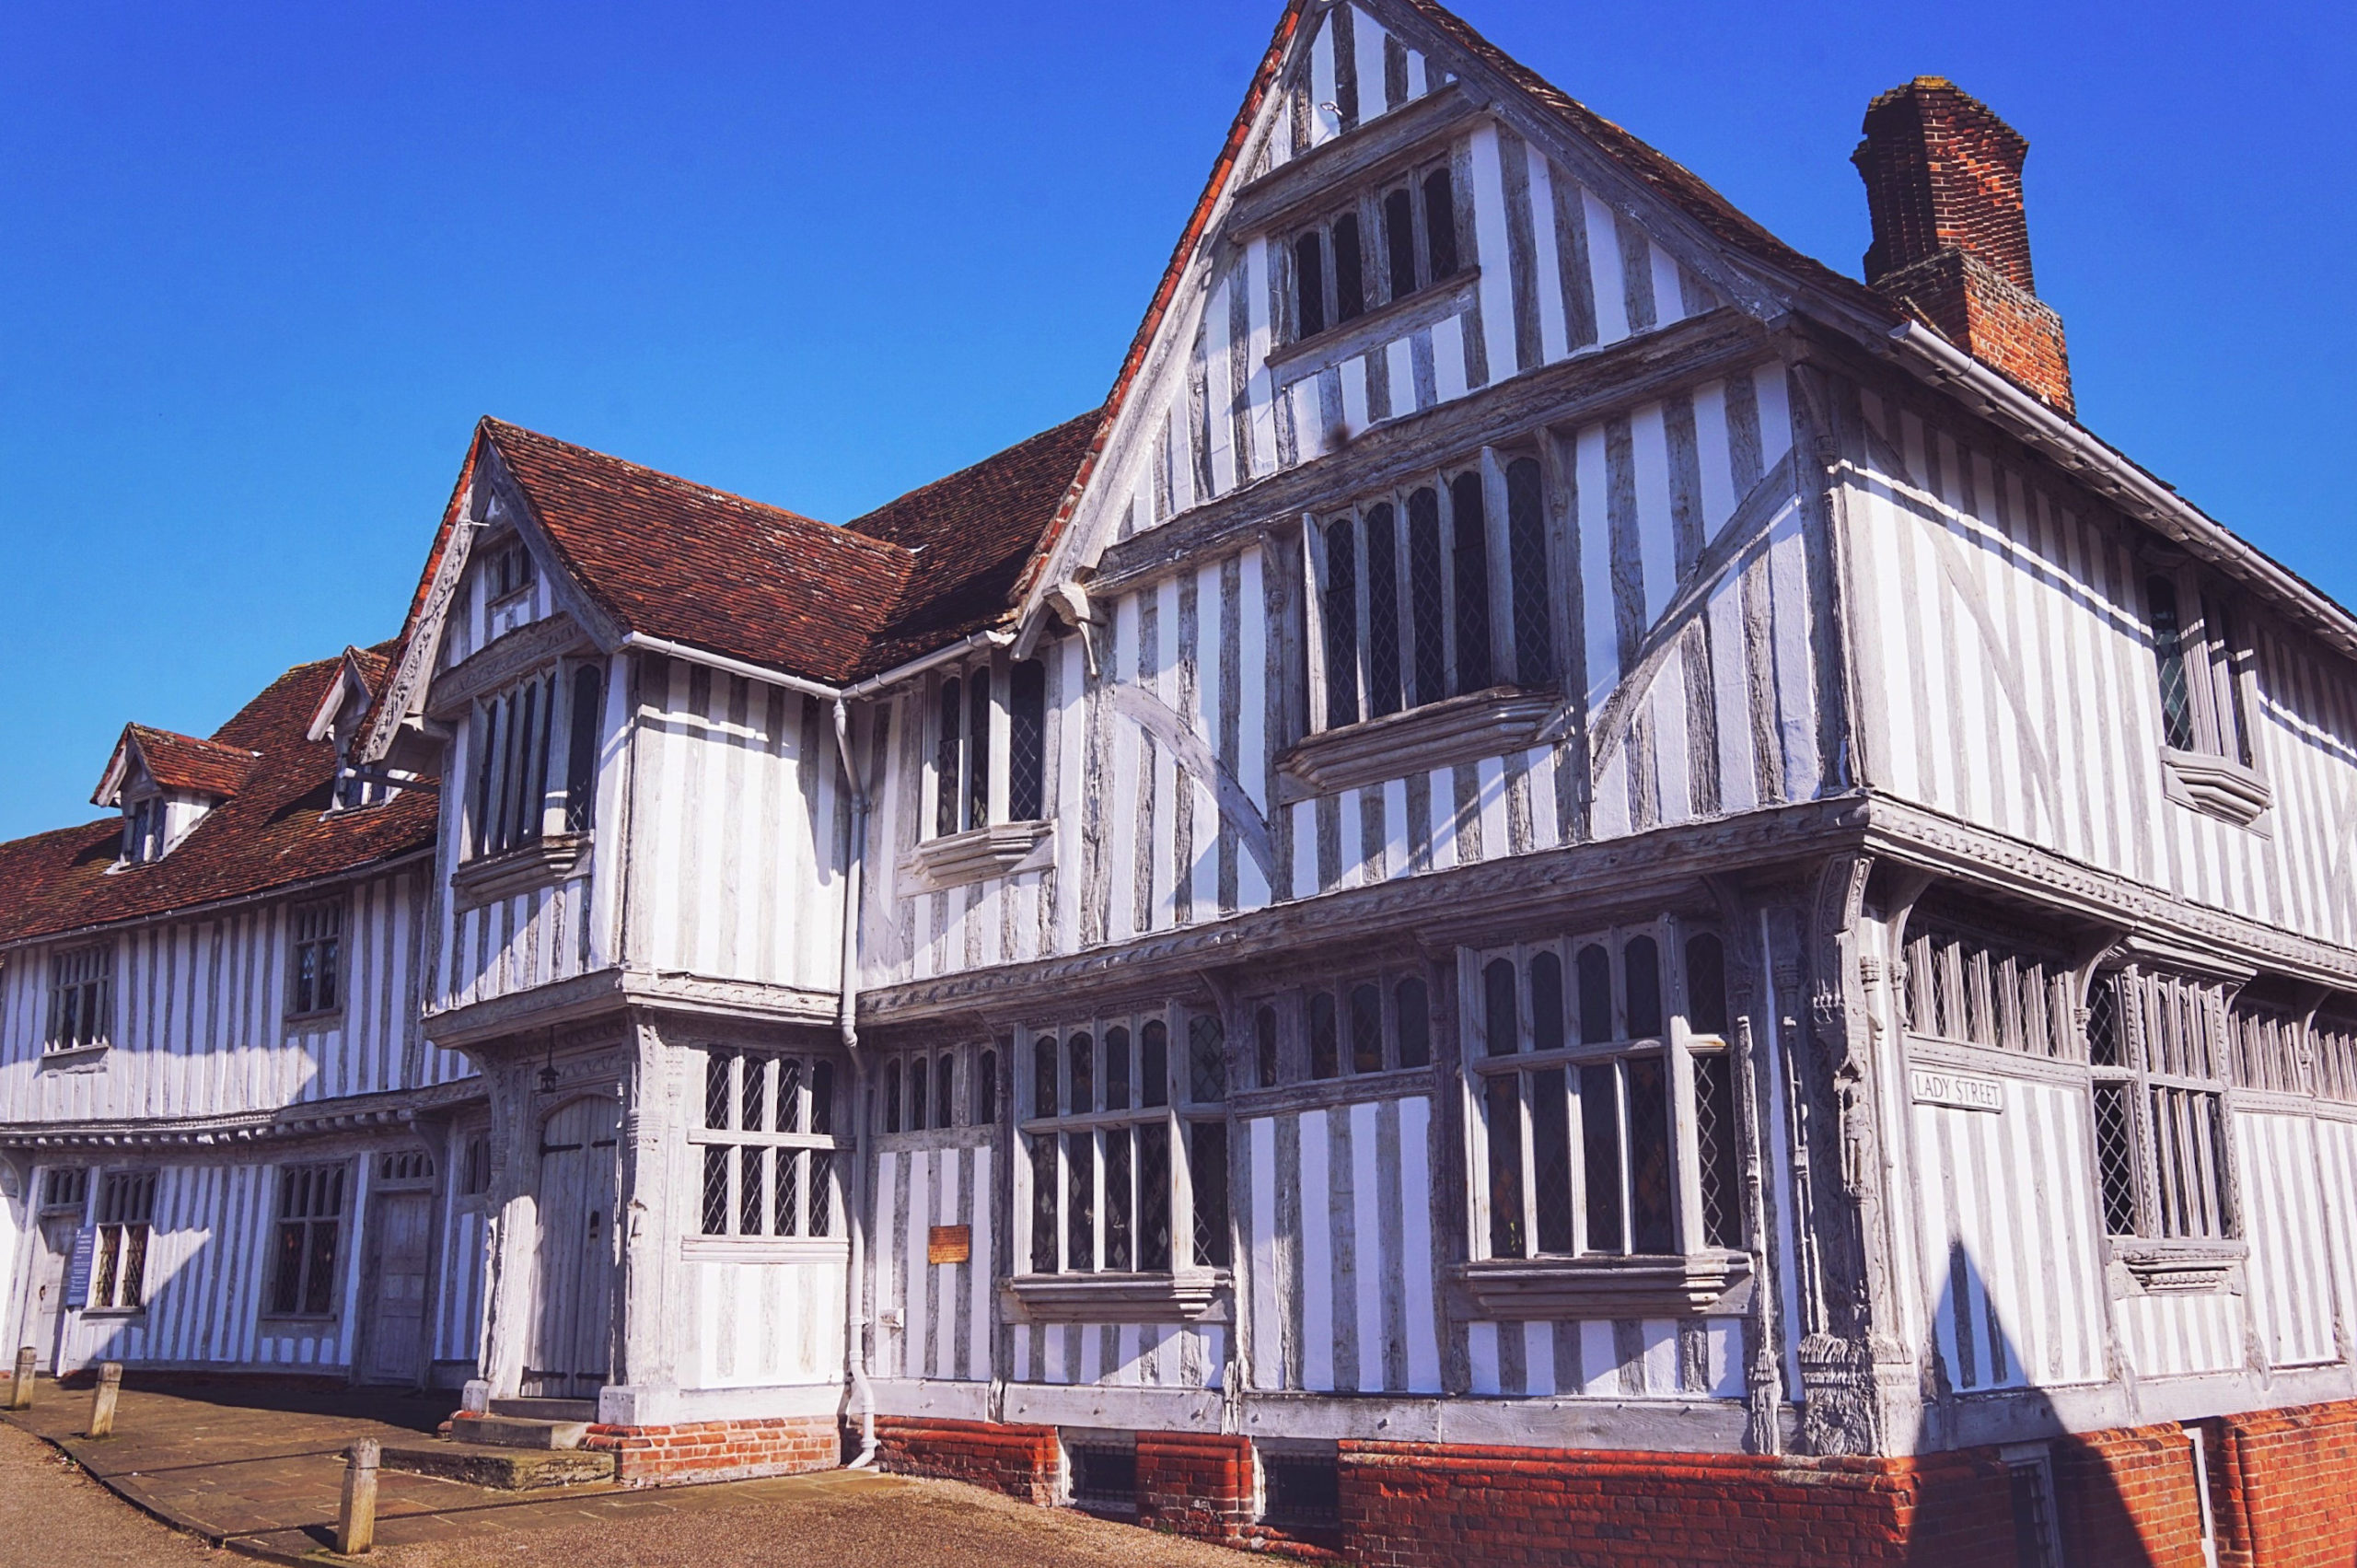 Harry Potter filming locations: visit the real-life Godric's Hollow!